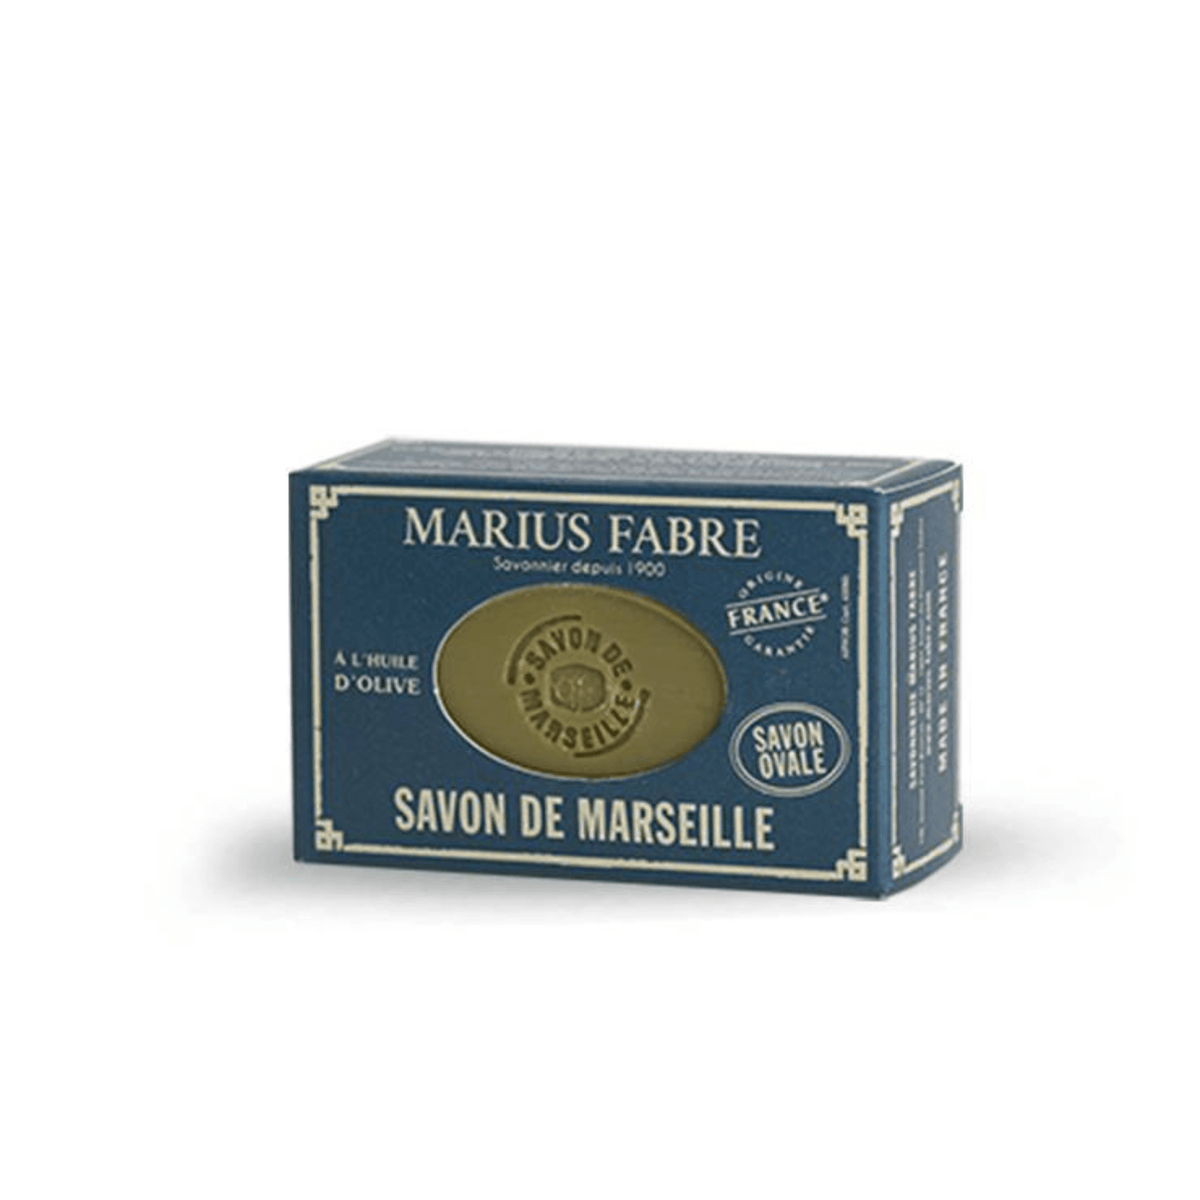 Primary Image of Olive Oil Marseille Oval Bar Soap